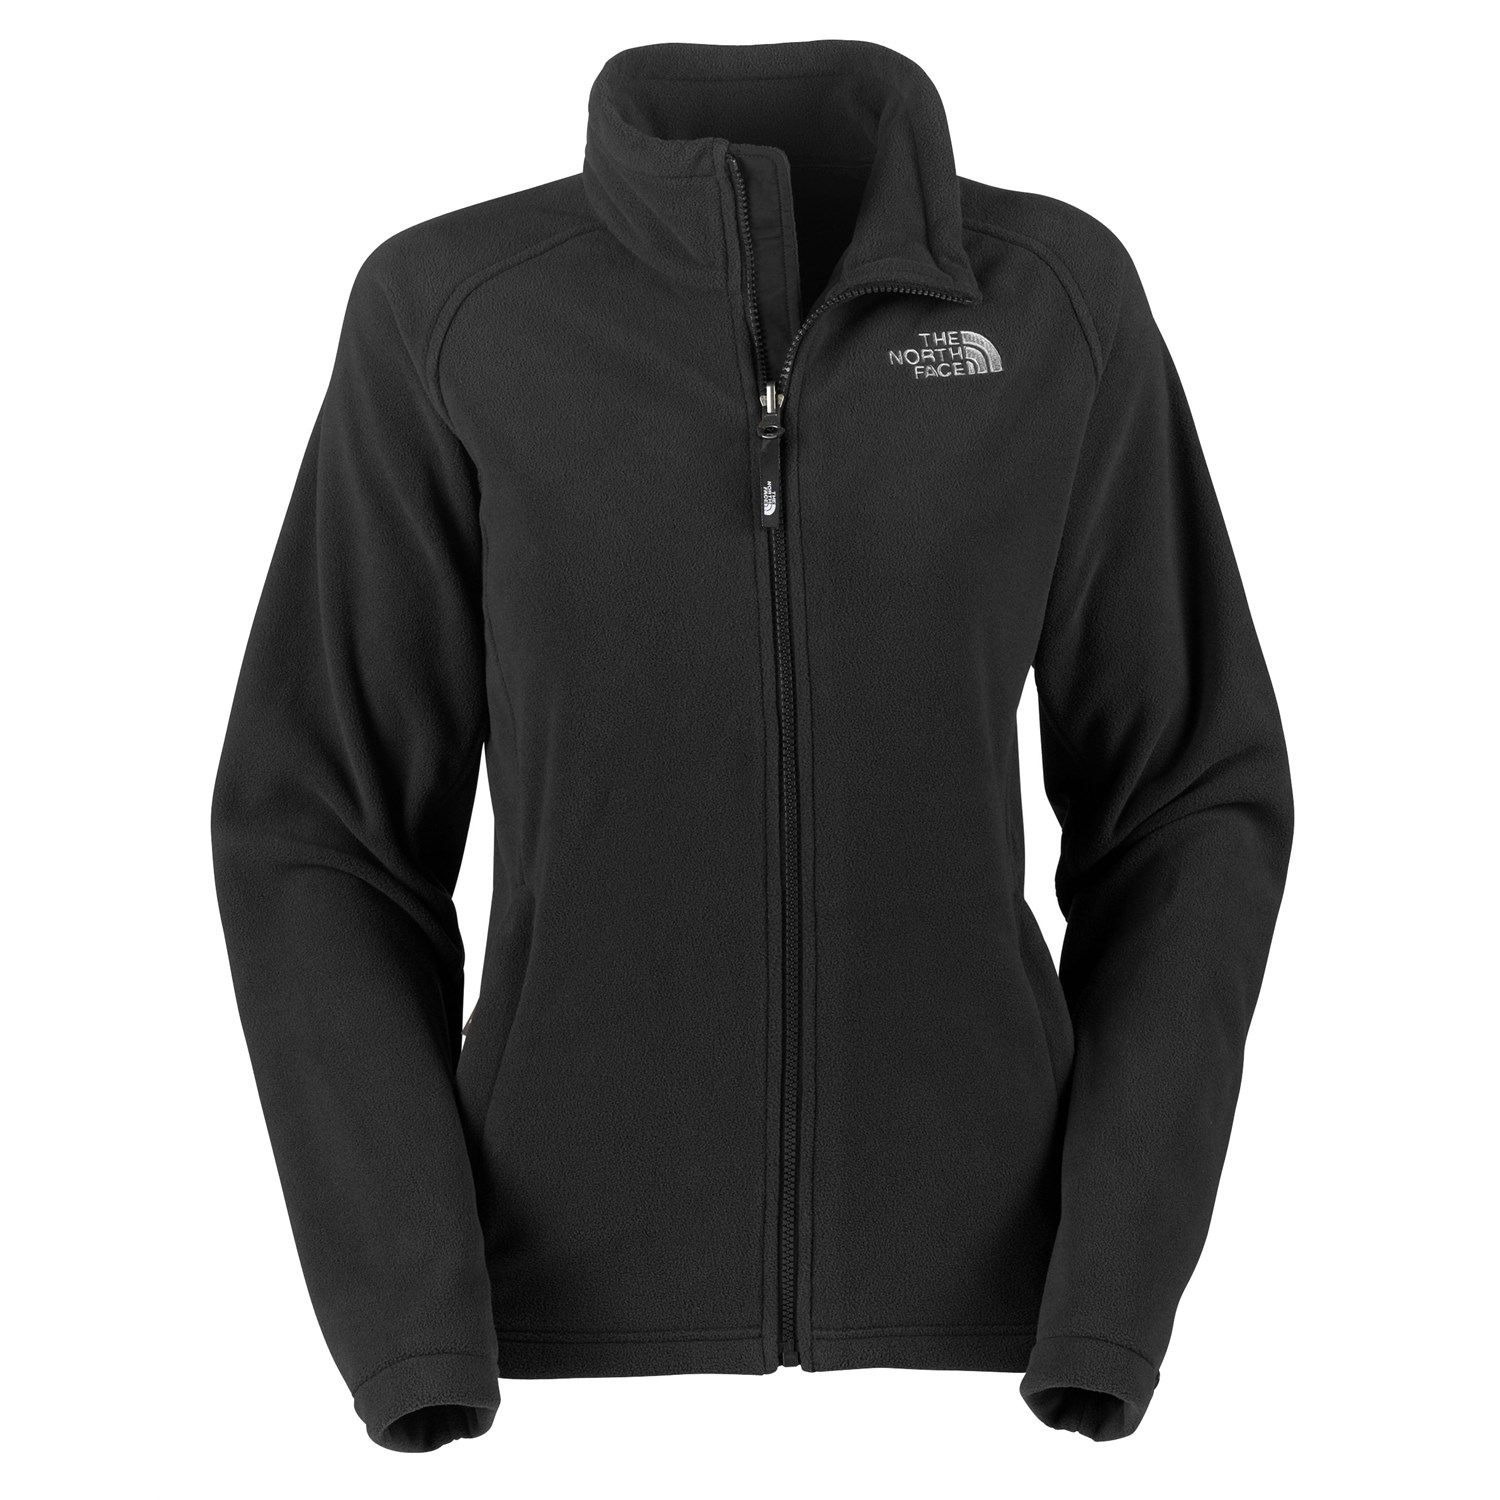 north face jacket without hood